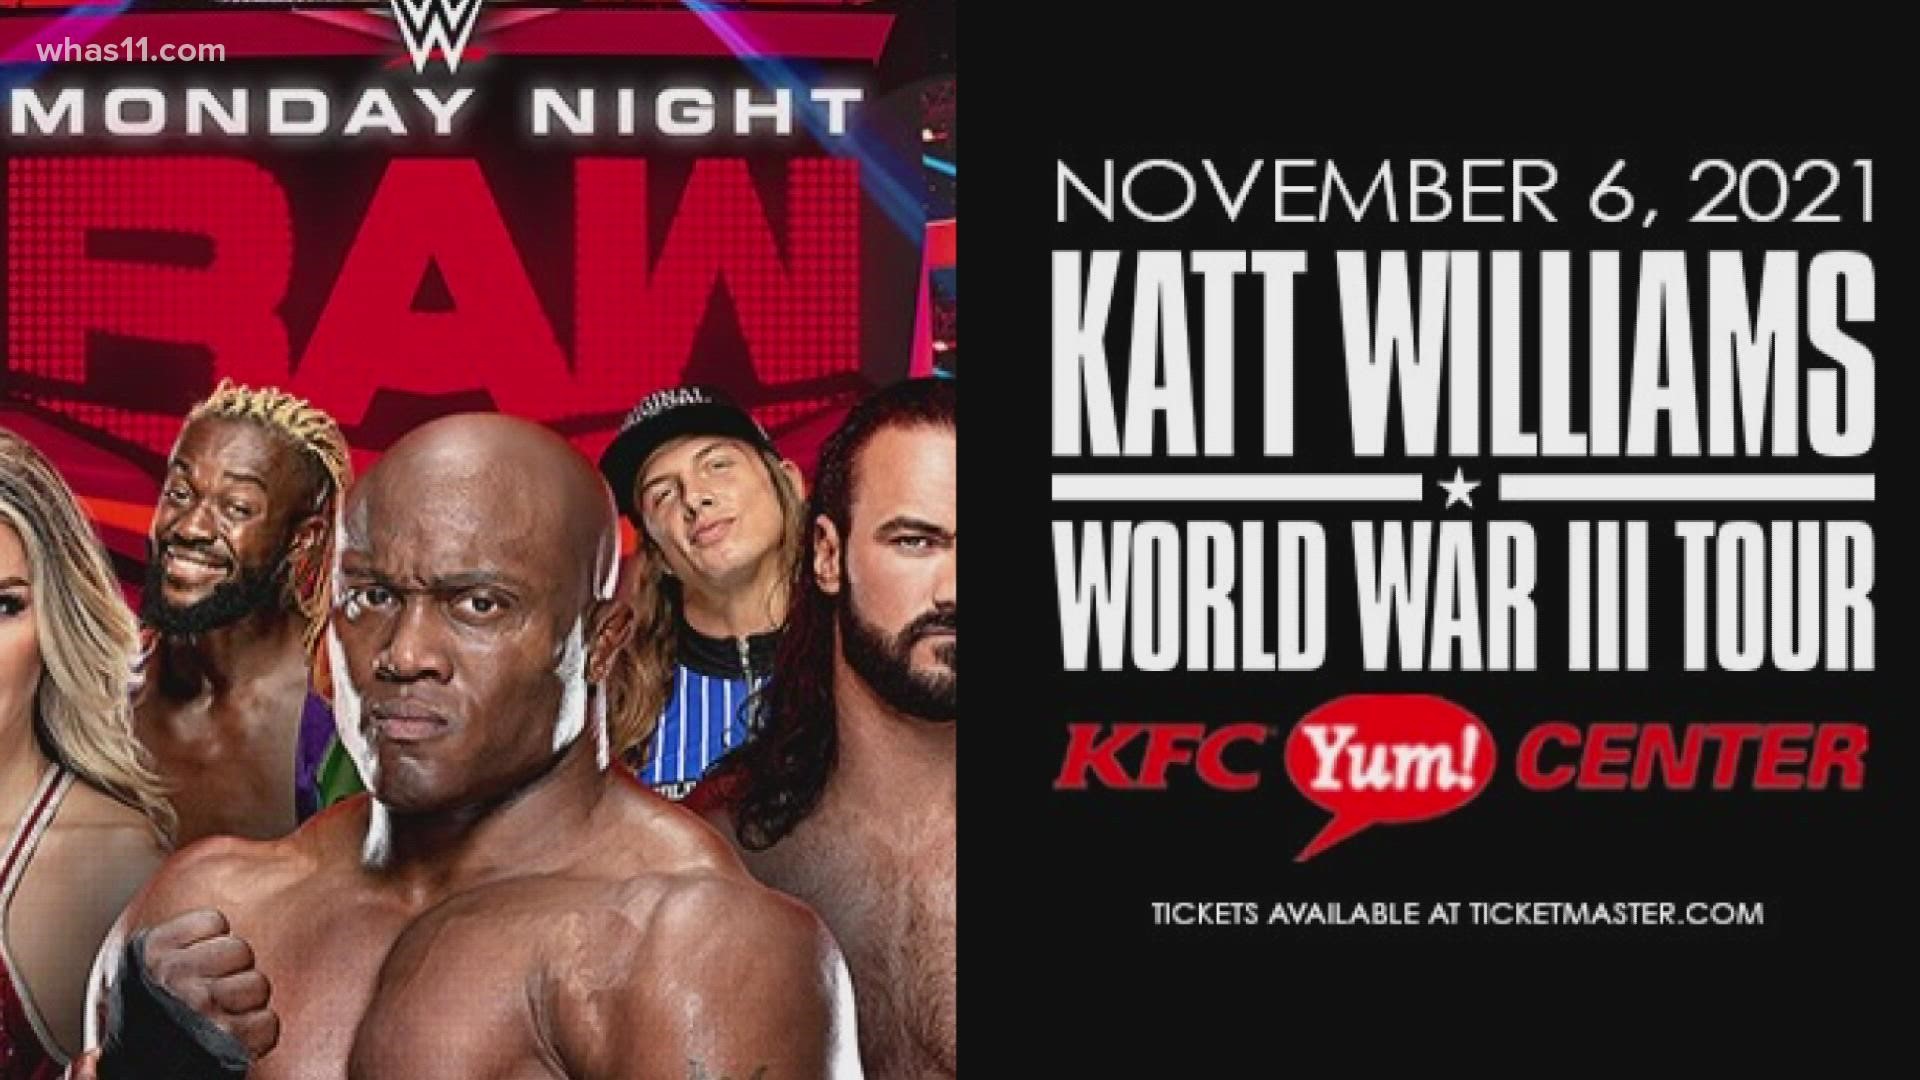 The 411's Sherlene Shanklin previews the upcoming Monday Night Raw WWE show and comedian Katt Williams stop at the KFC Yum! Center